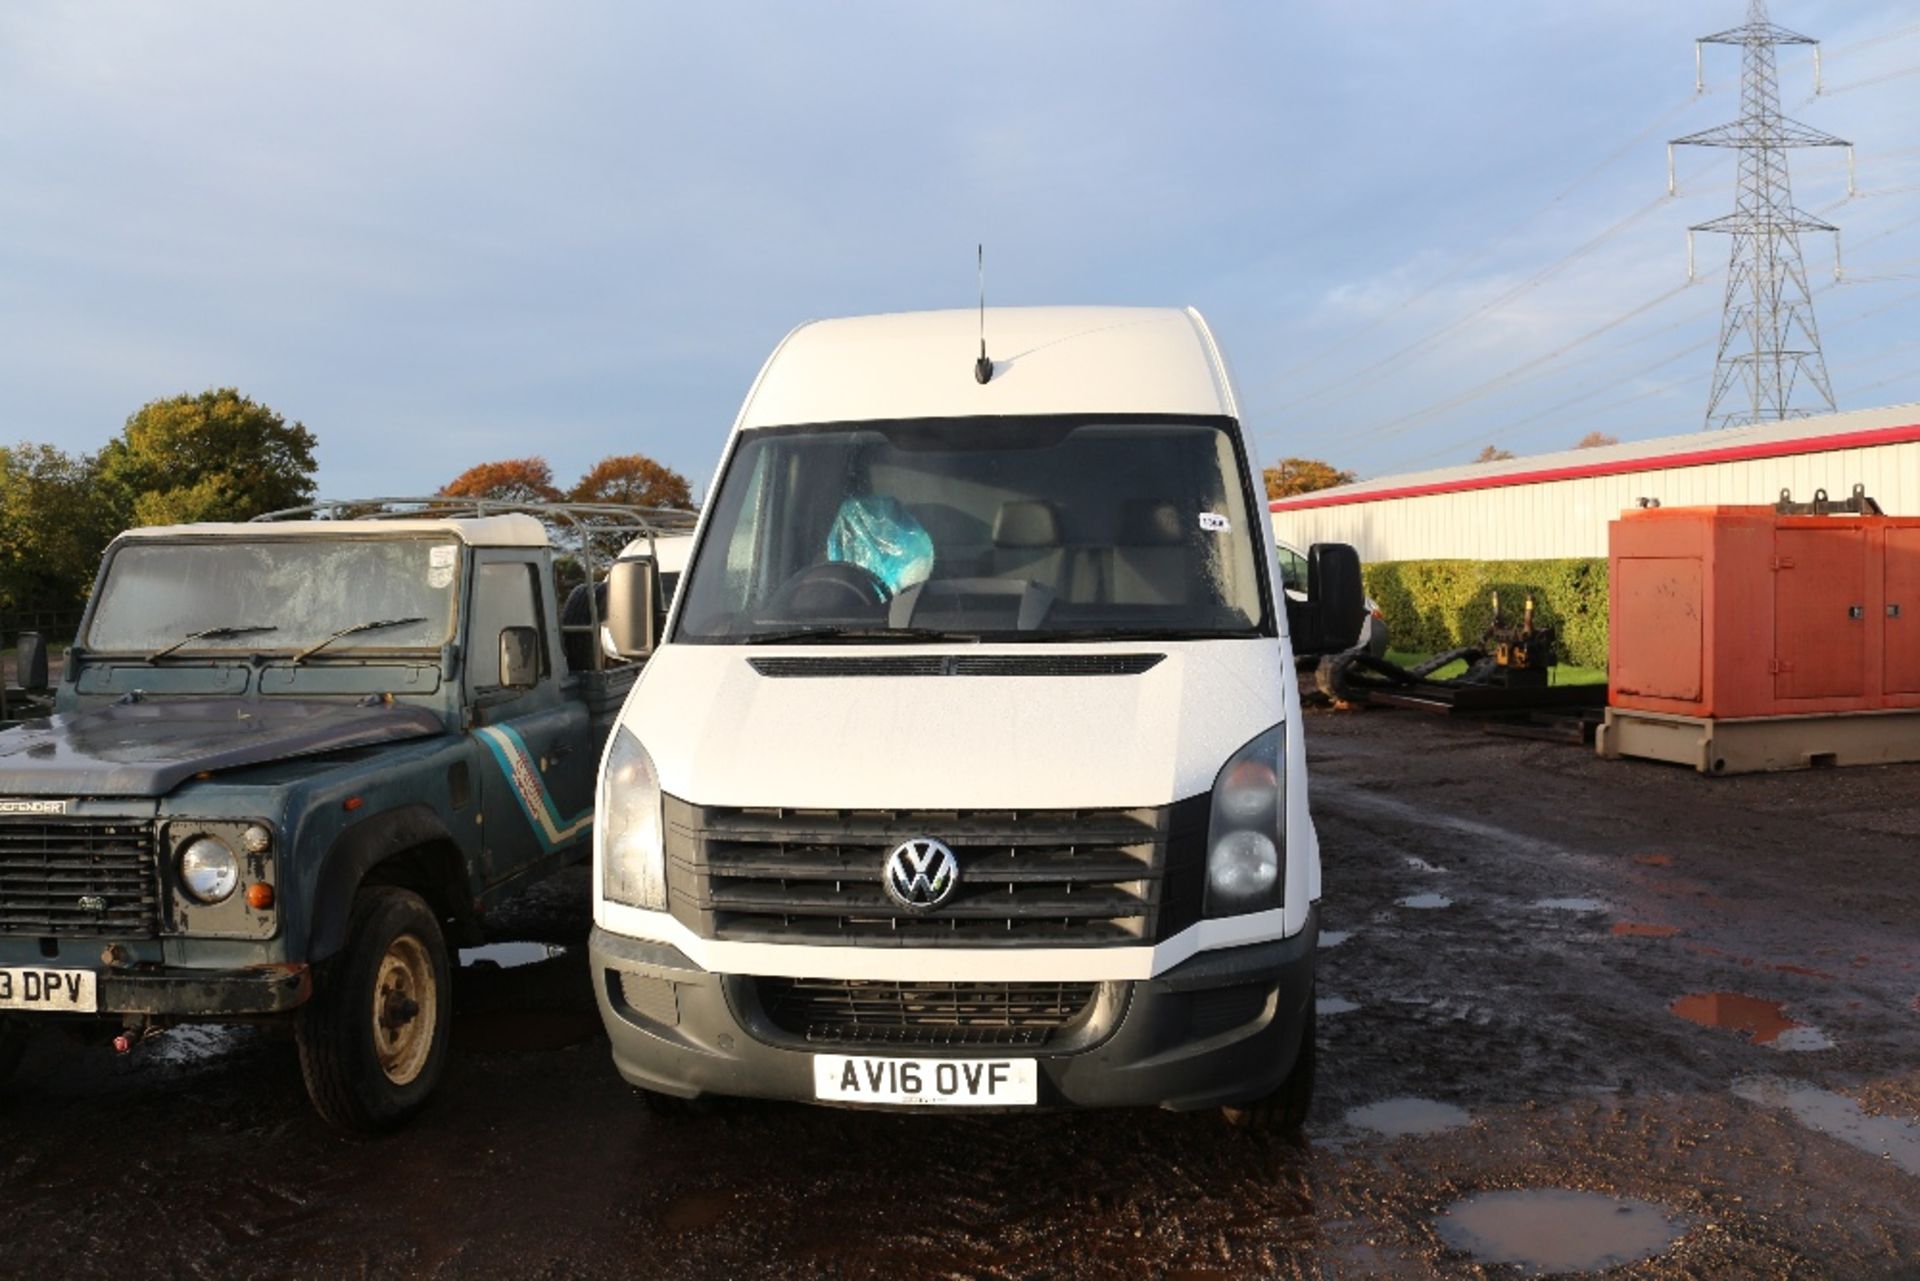 VW Crafter CR35 TDI van. Registration AU16 OVF. Date of first registration 04/16. Mileage to follow. - Image 2 of 4